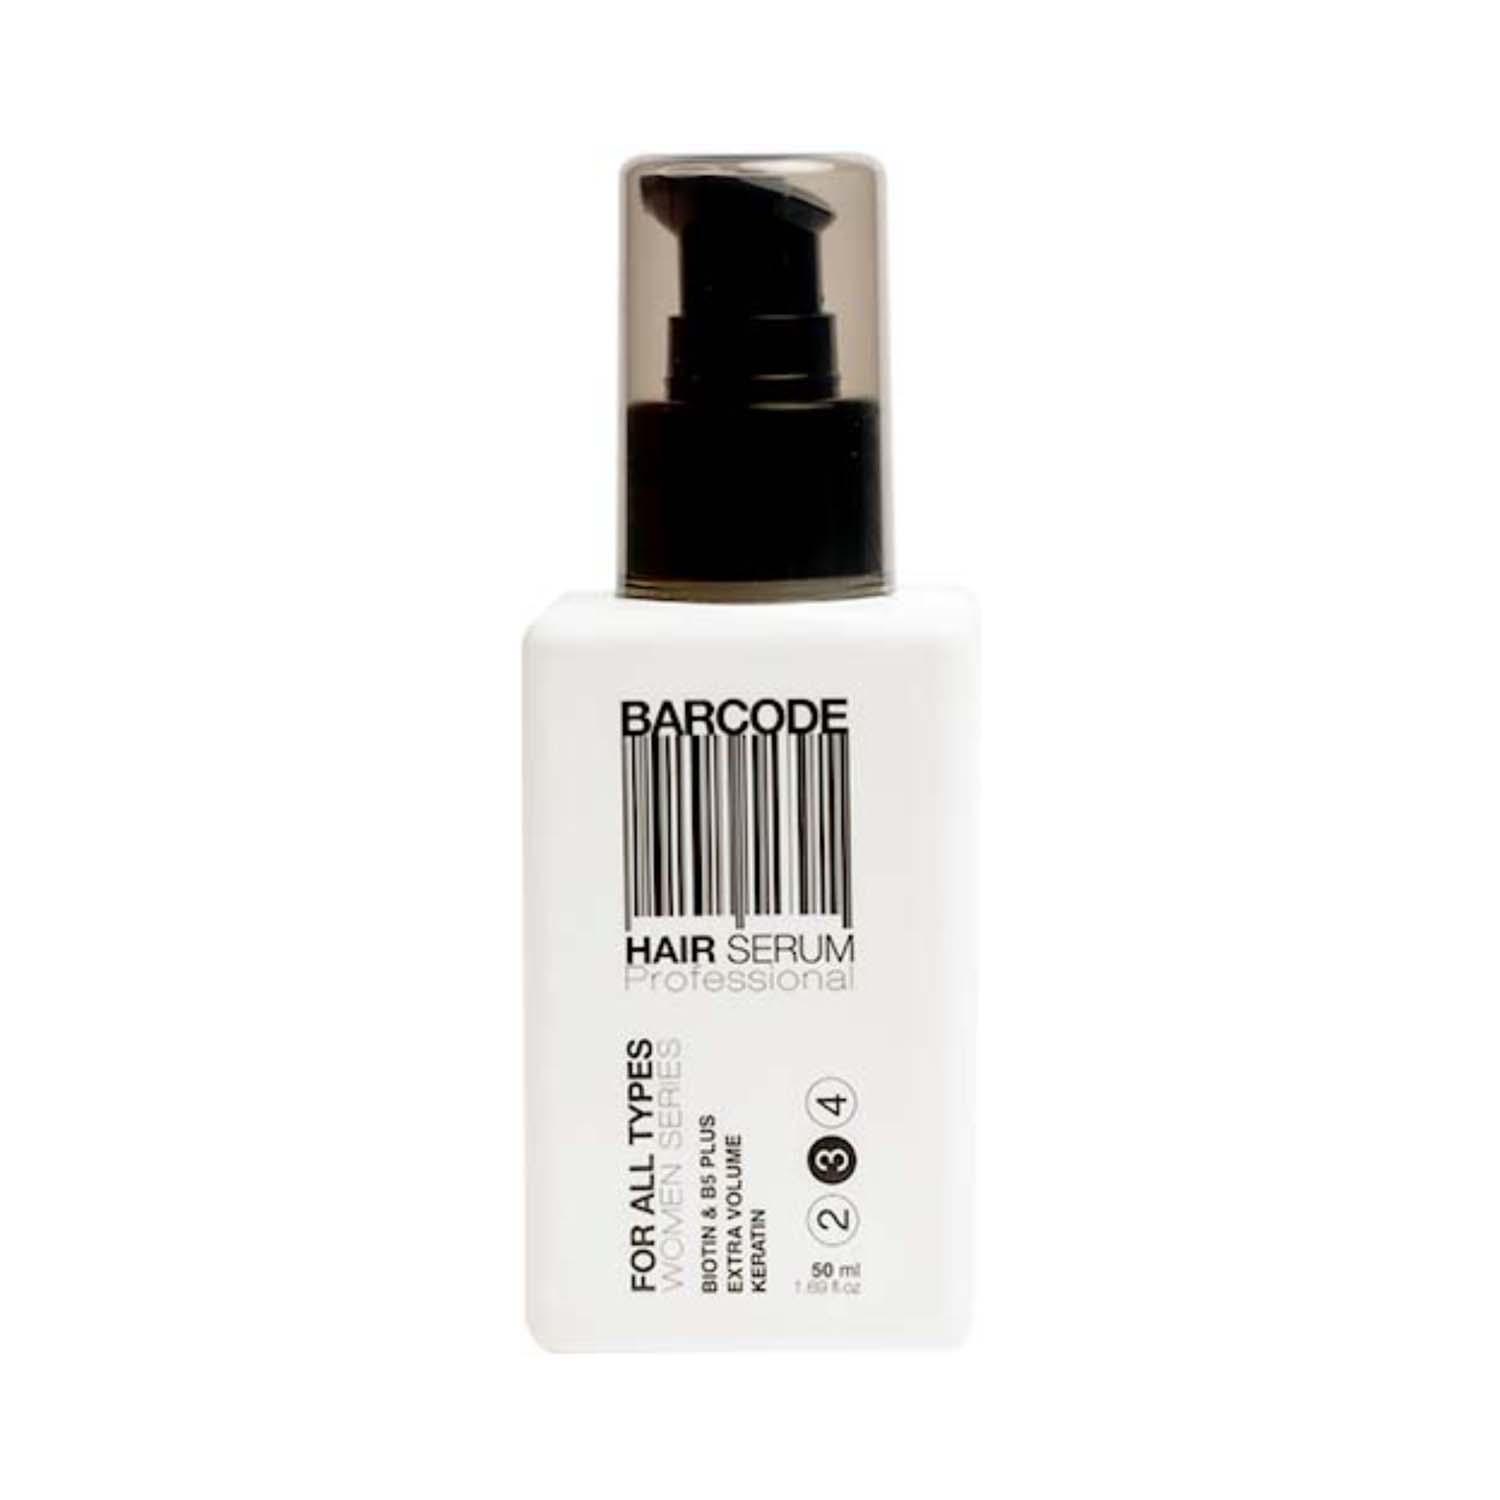 Barcode Professional | Barcode Professional Hair Serum For All Types - BCHS002 (50 ml)